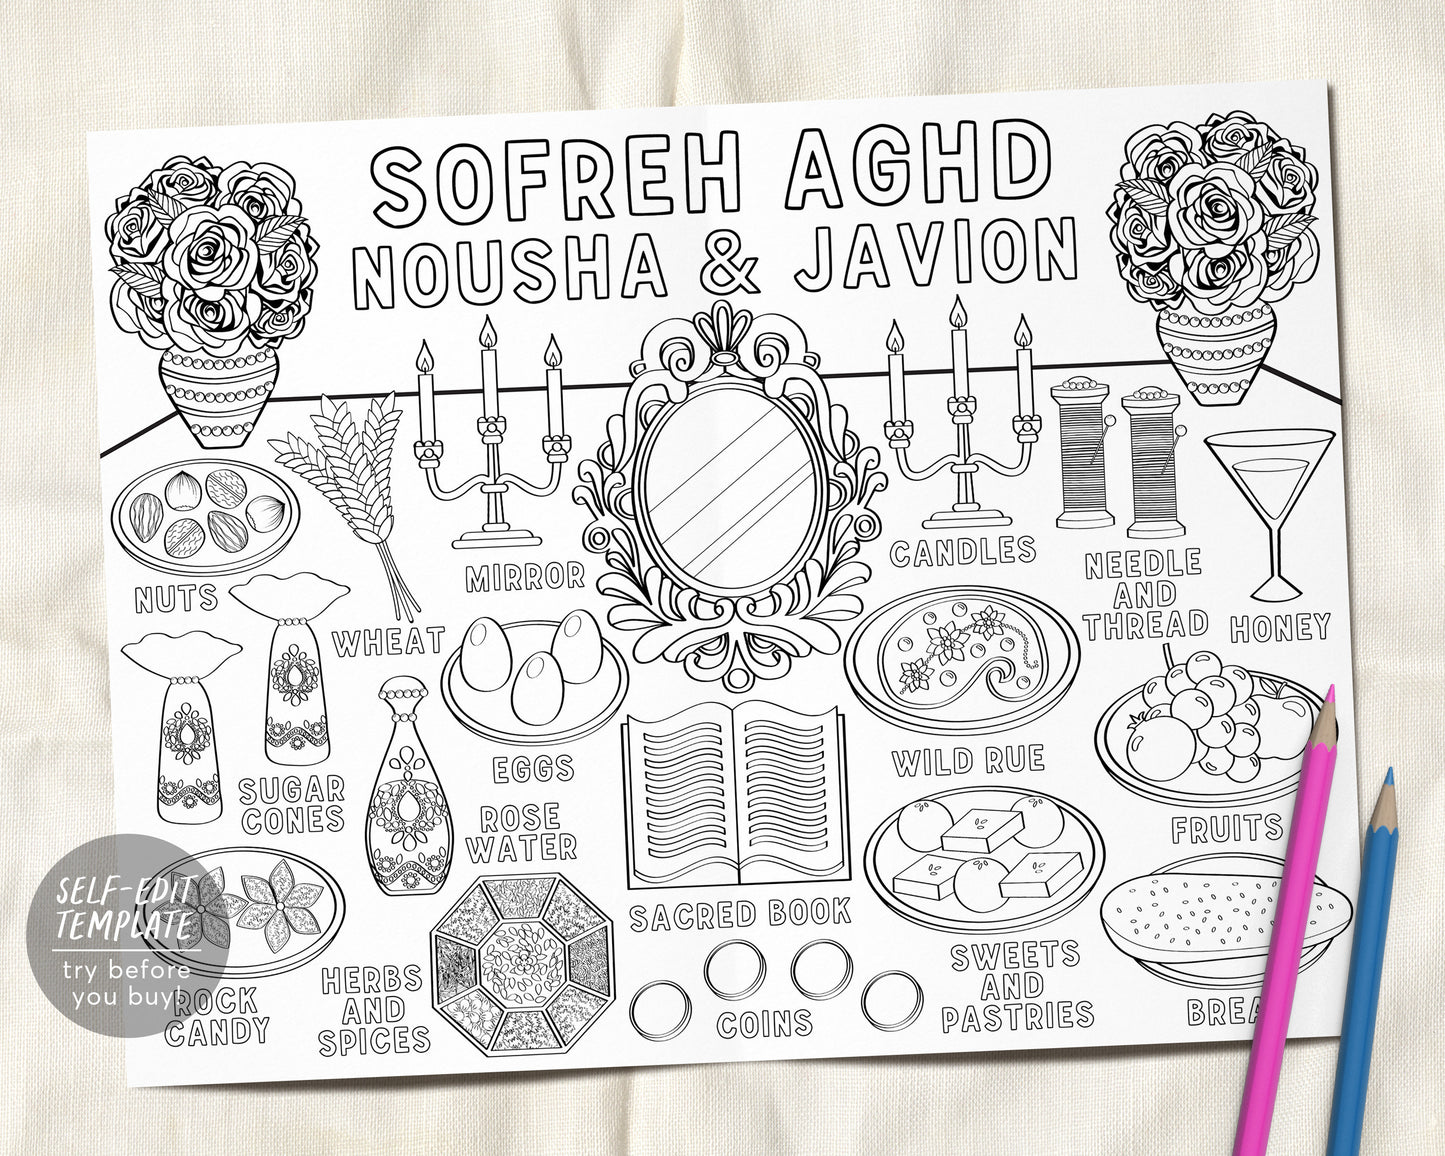 Sofreh Aghd Coloring Placemat For Kids Editable Template, Persian Wedding Ceremony Items Coloring Page Craft Activity Sheet Table Mat Games